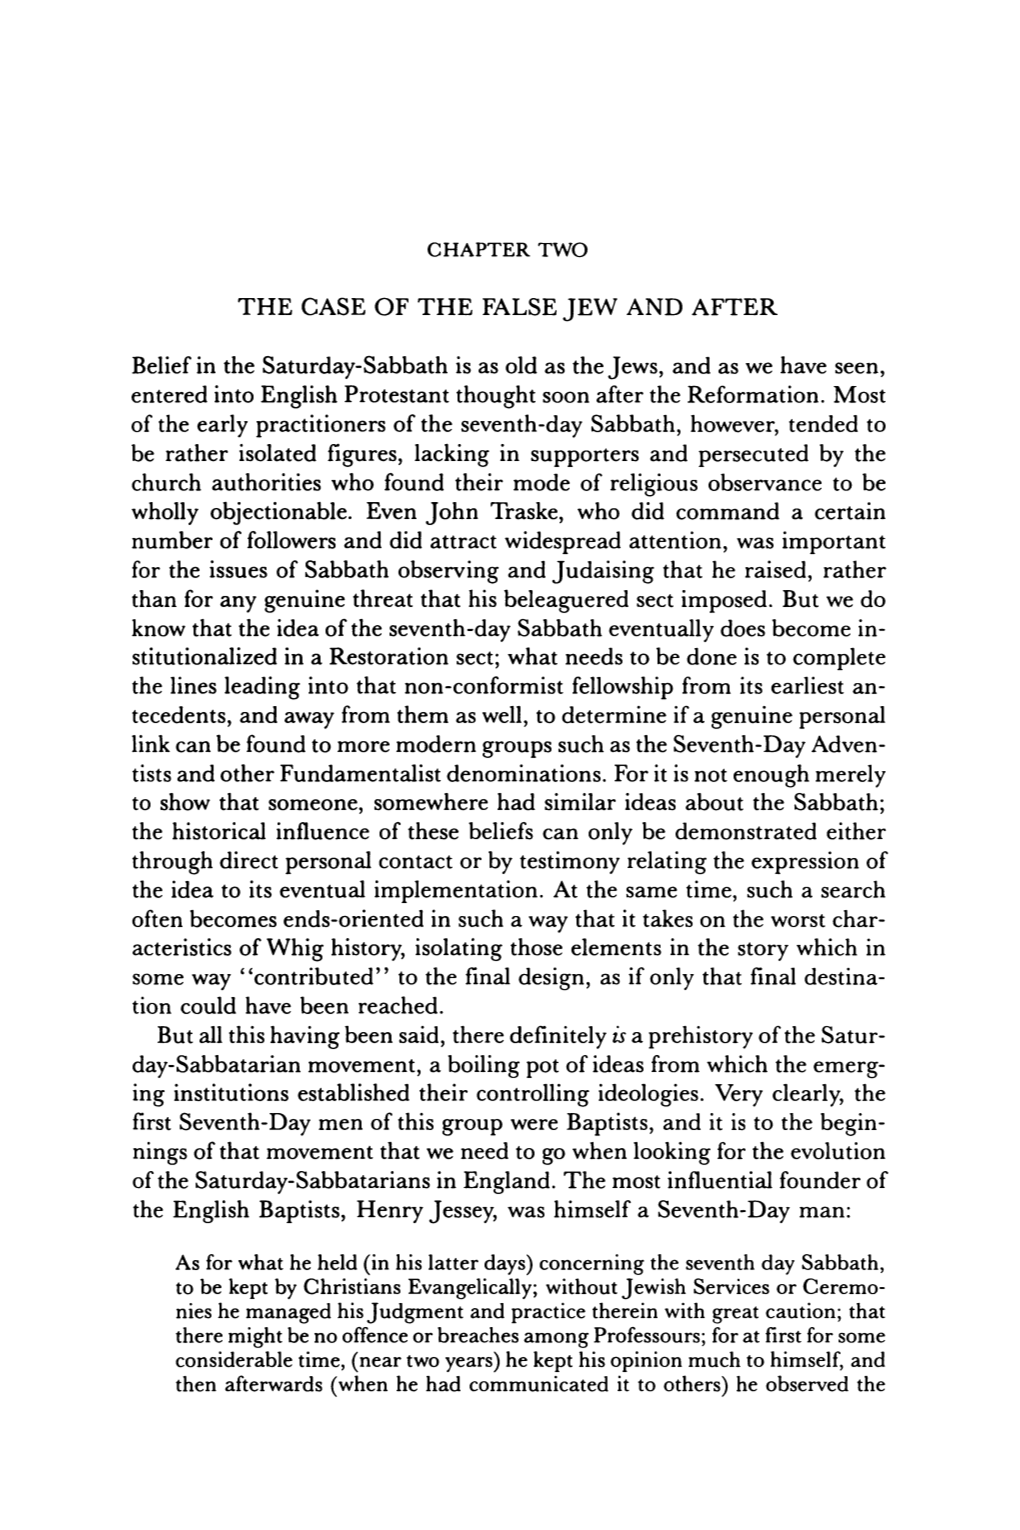 The Case of the False Jew and After